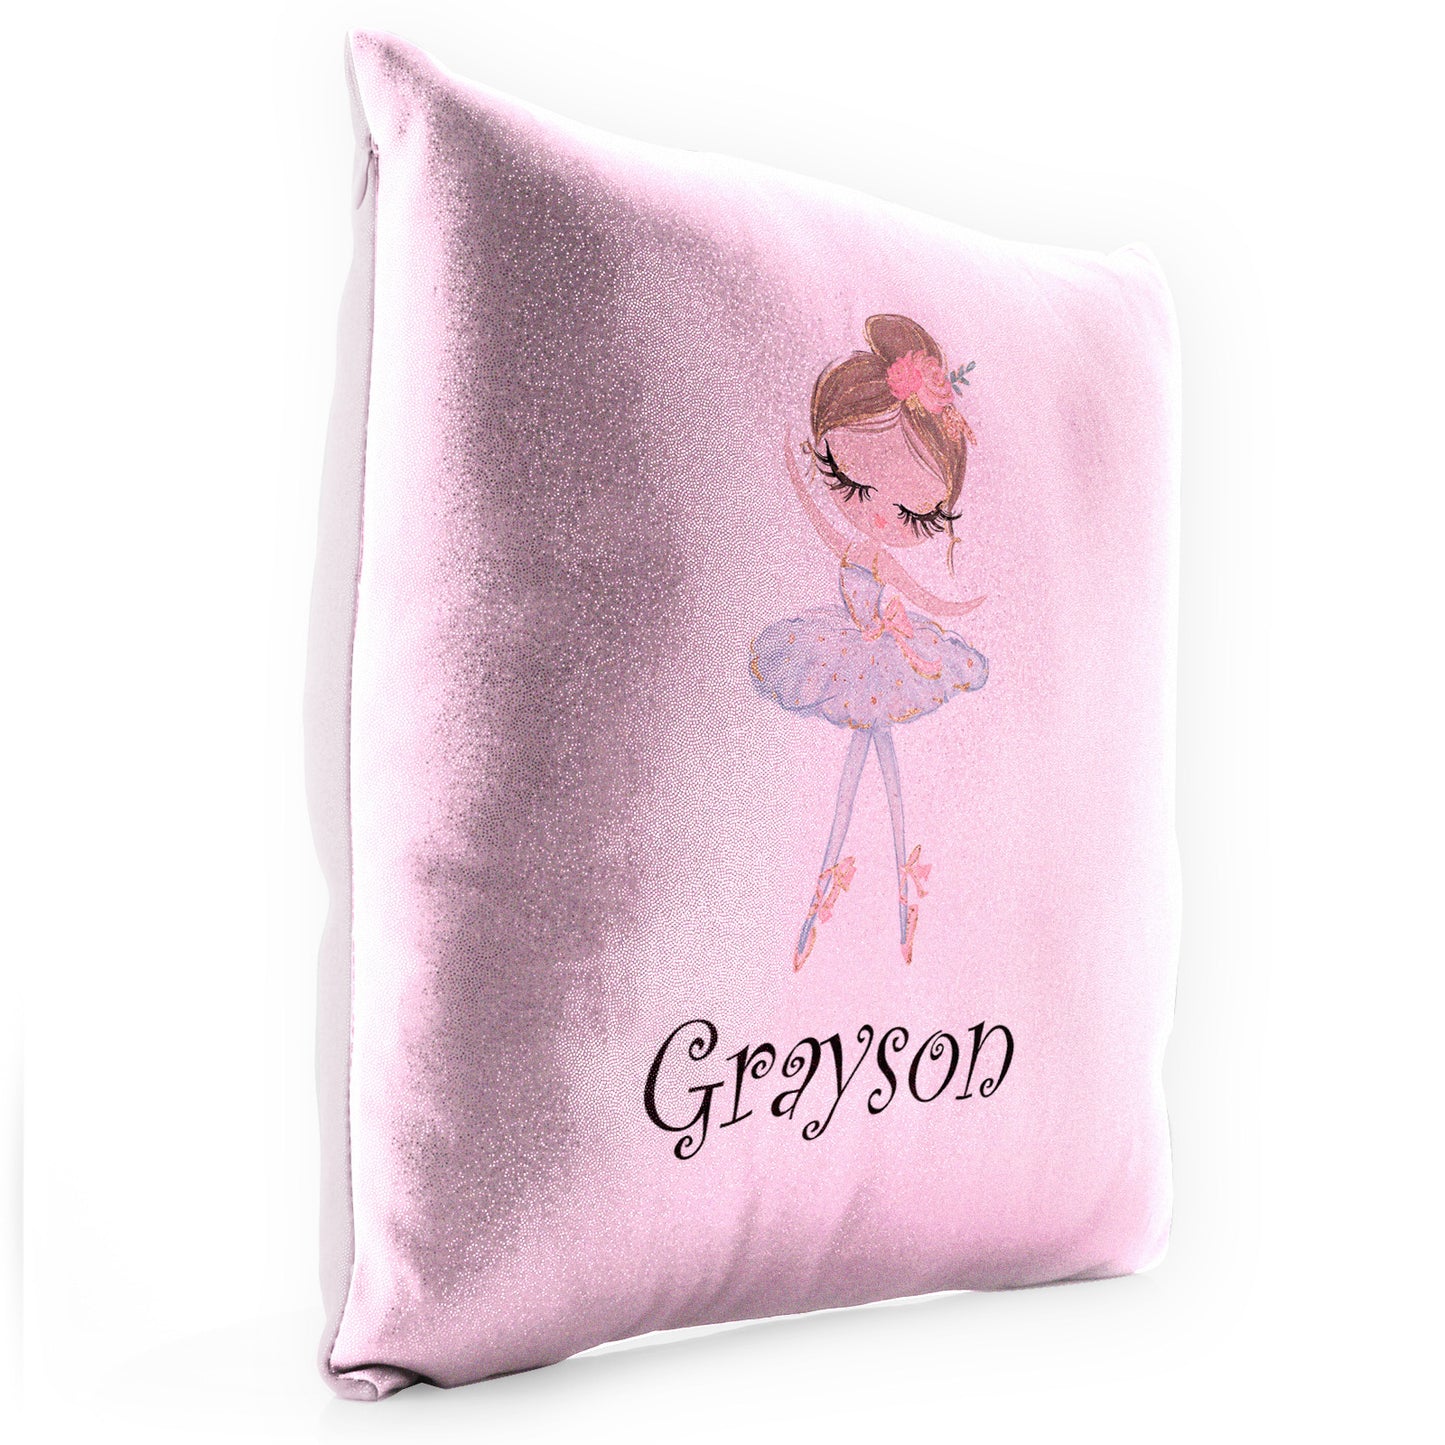 Personalised Glitter Cushion with Cute Text and Light Brown Hair White Dress Ballerina